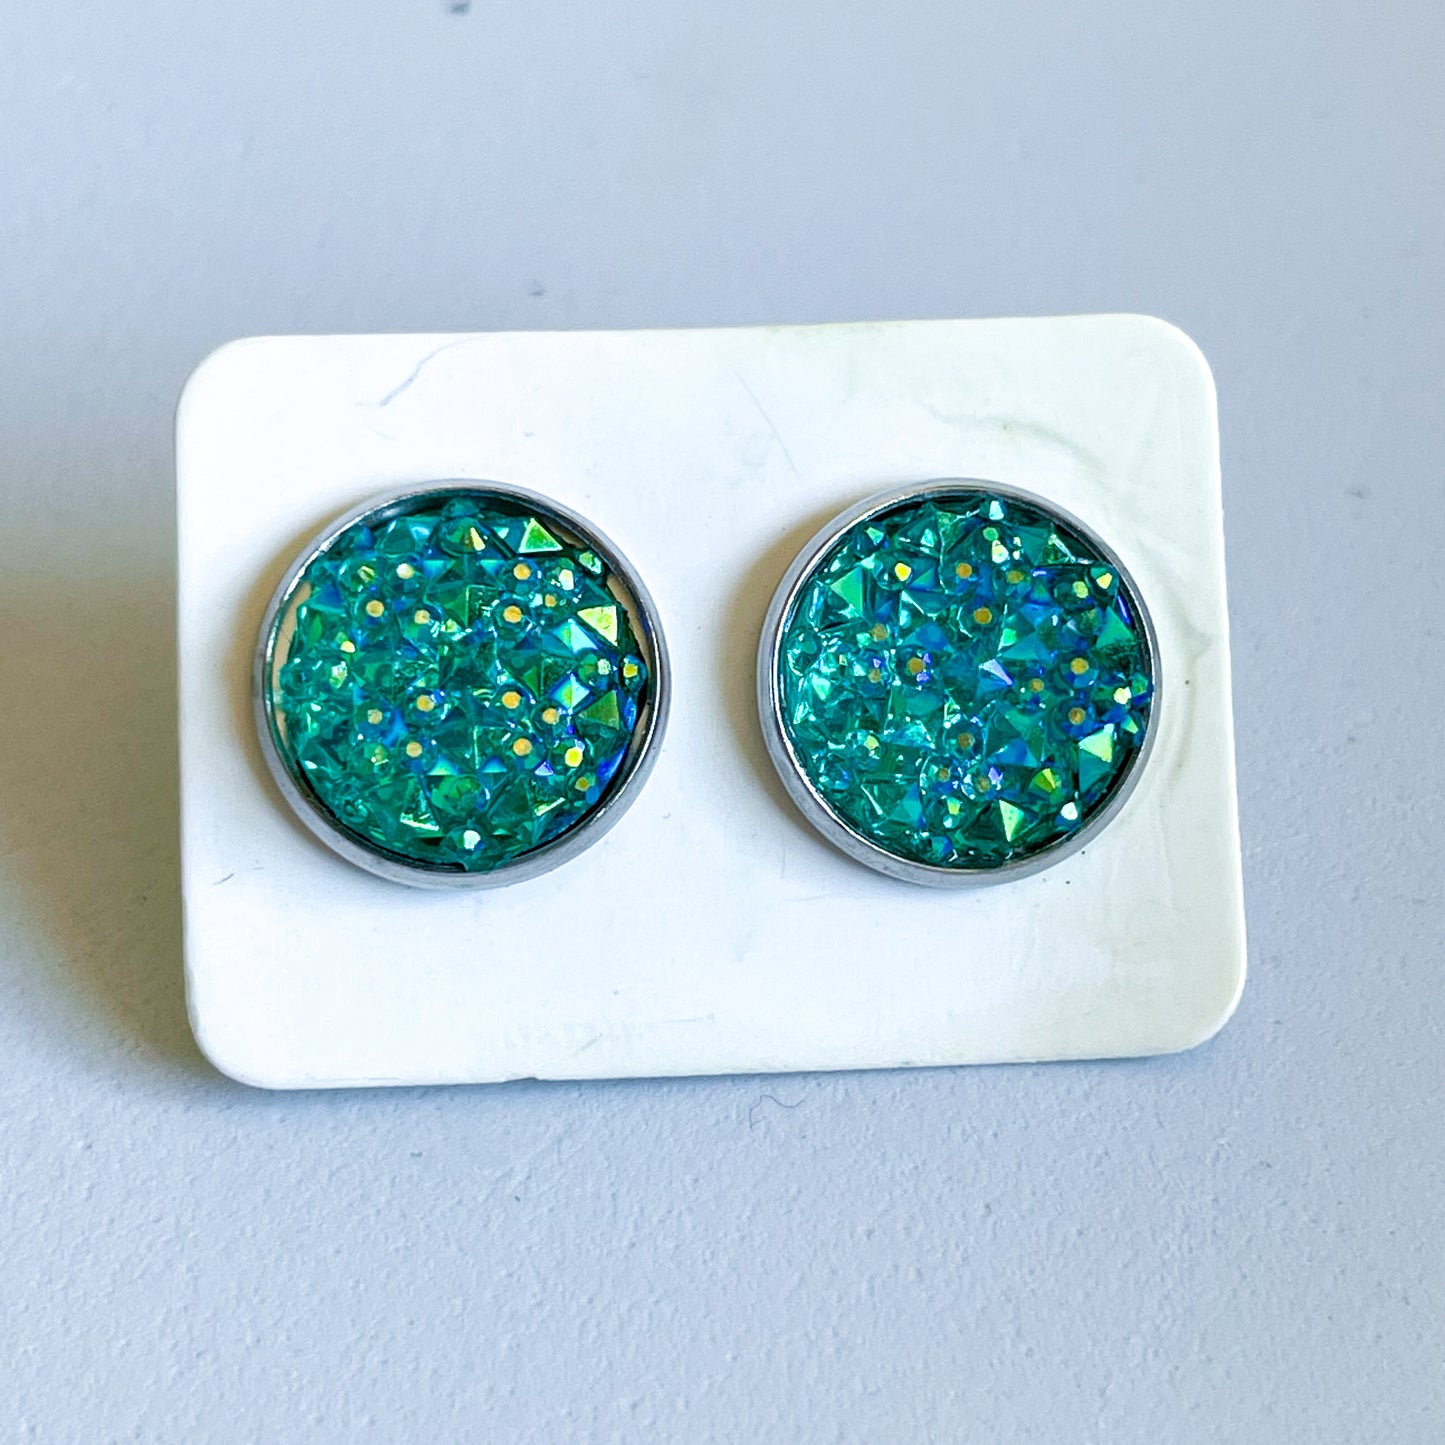 Blue Green Holographic Faux Gem Katelyn Style Earrings |12 MM Round Studs | Round Stud Earrings